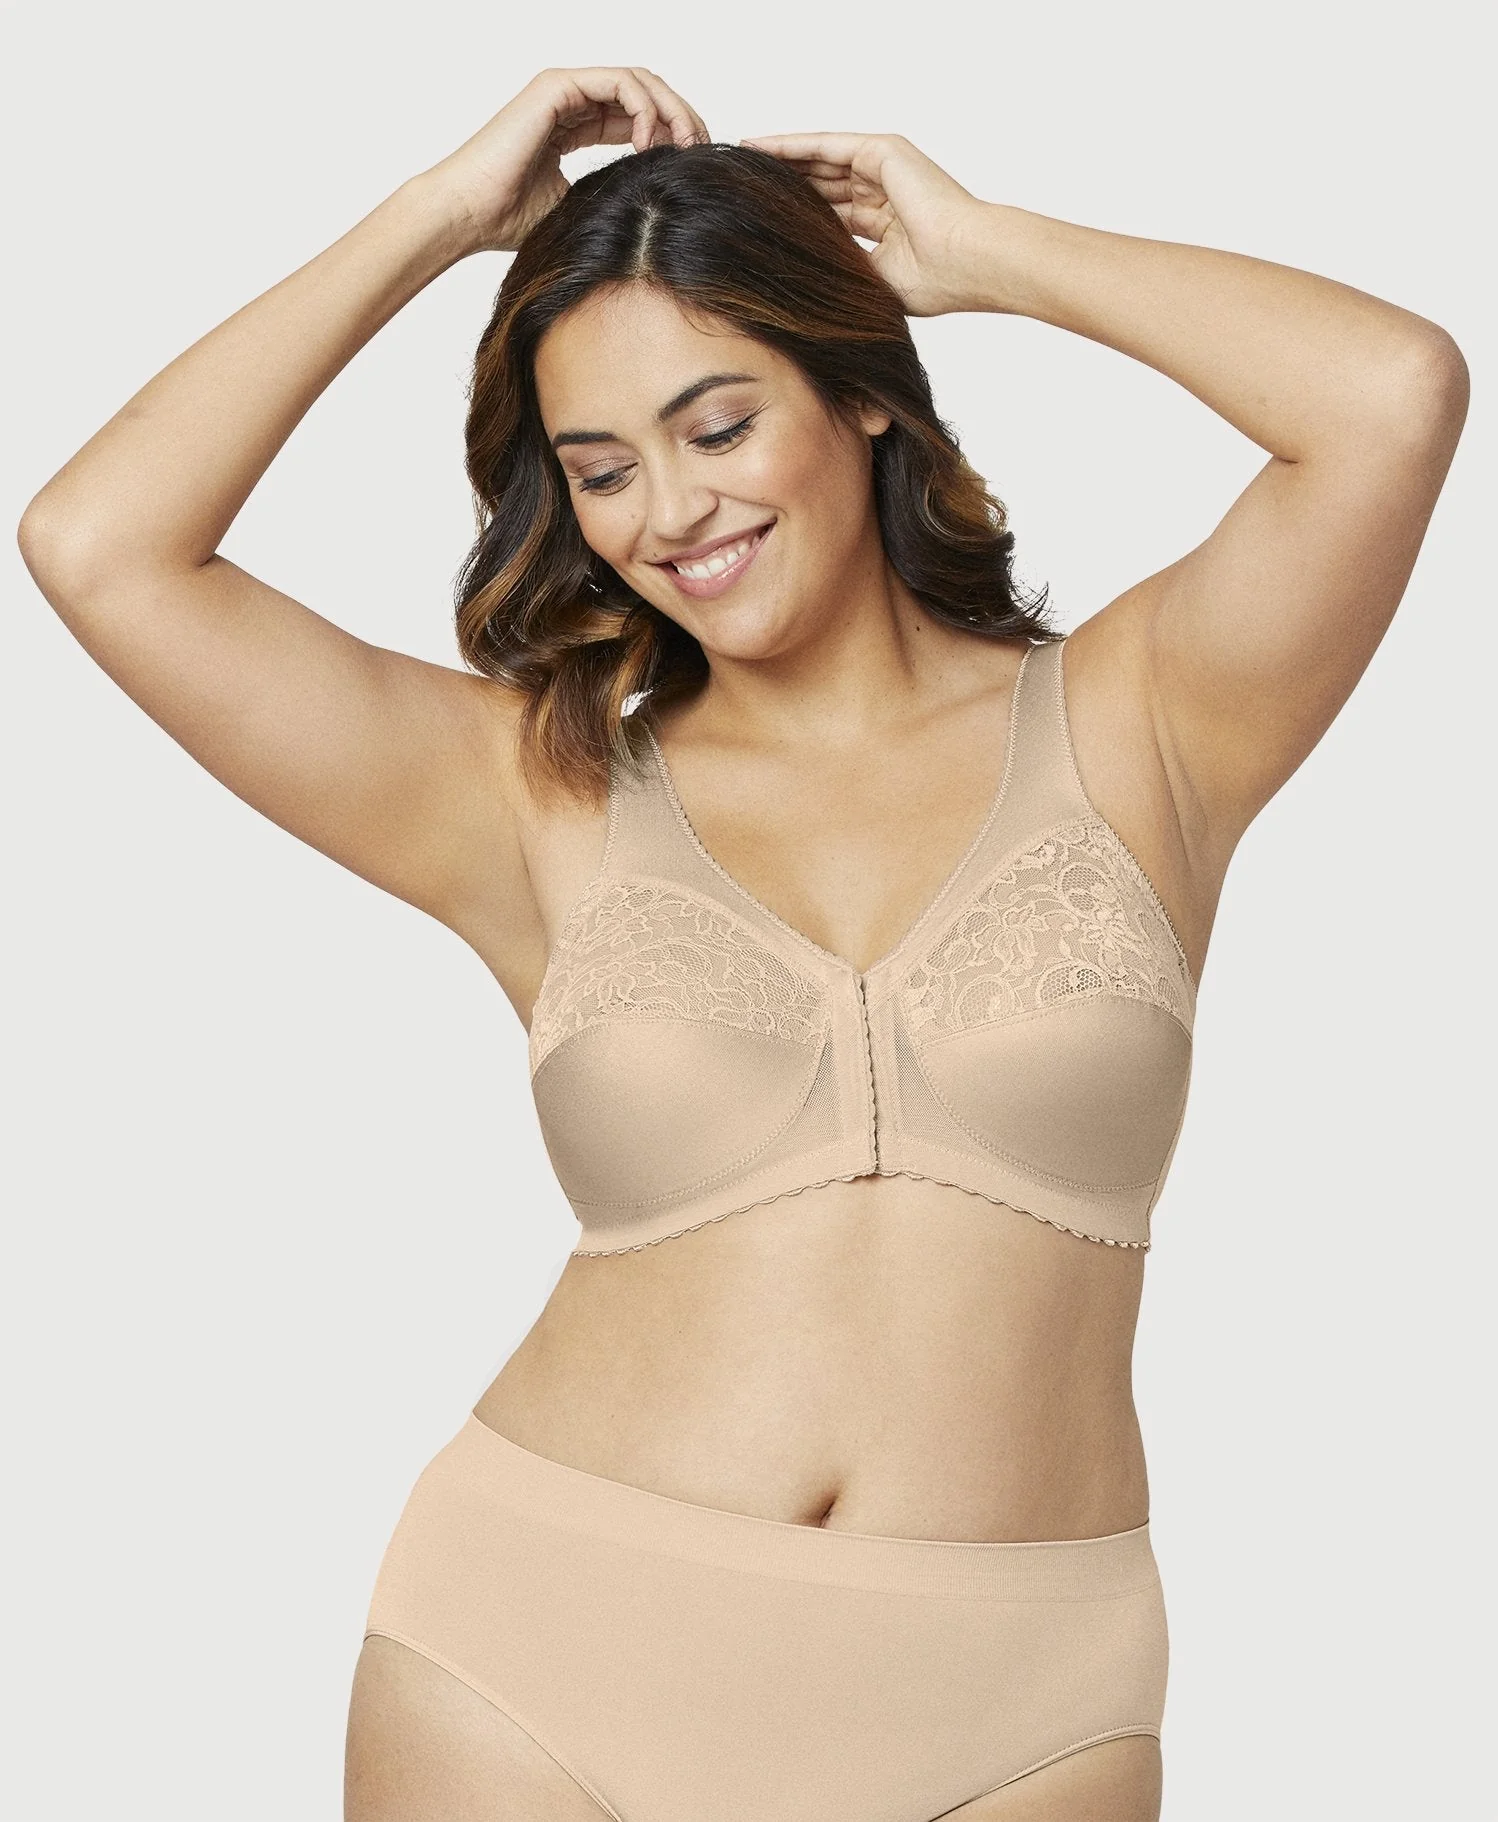 How To Choose The Best Front Closure Bra To Wear